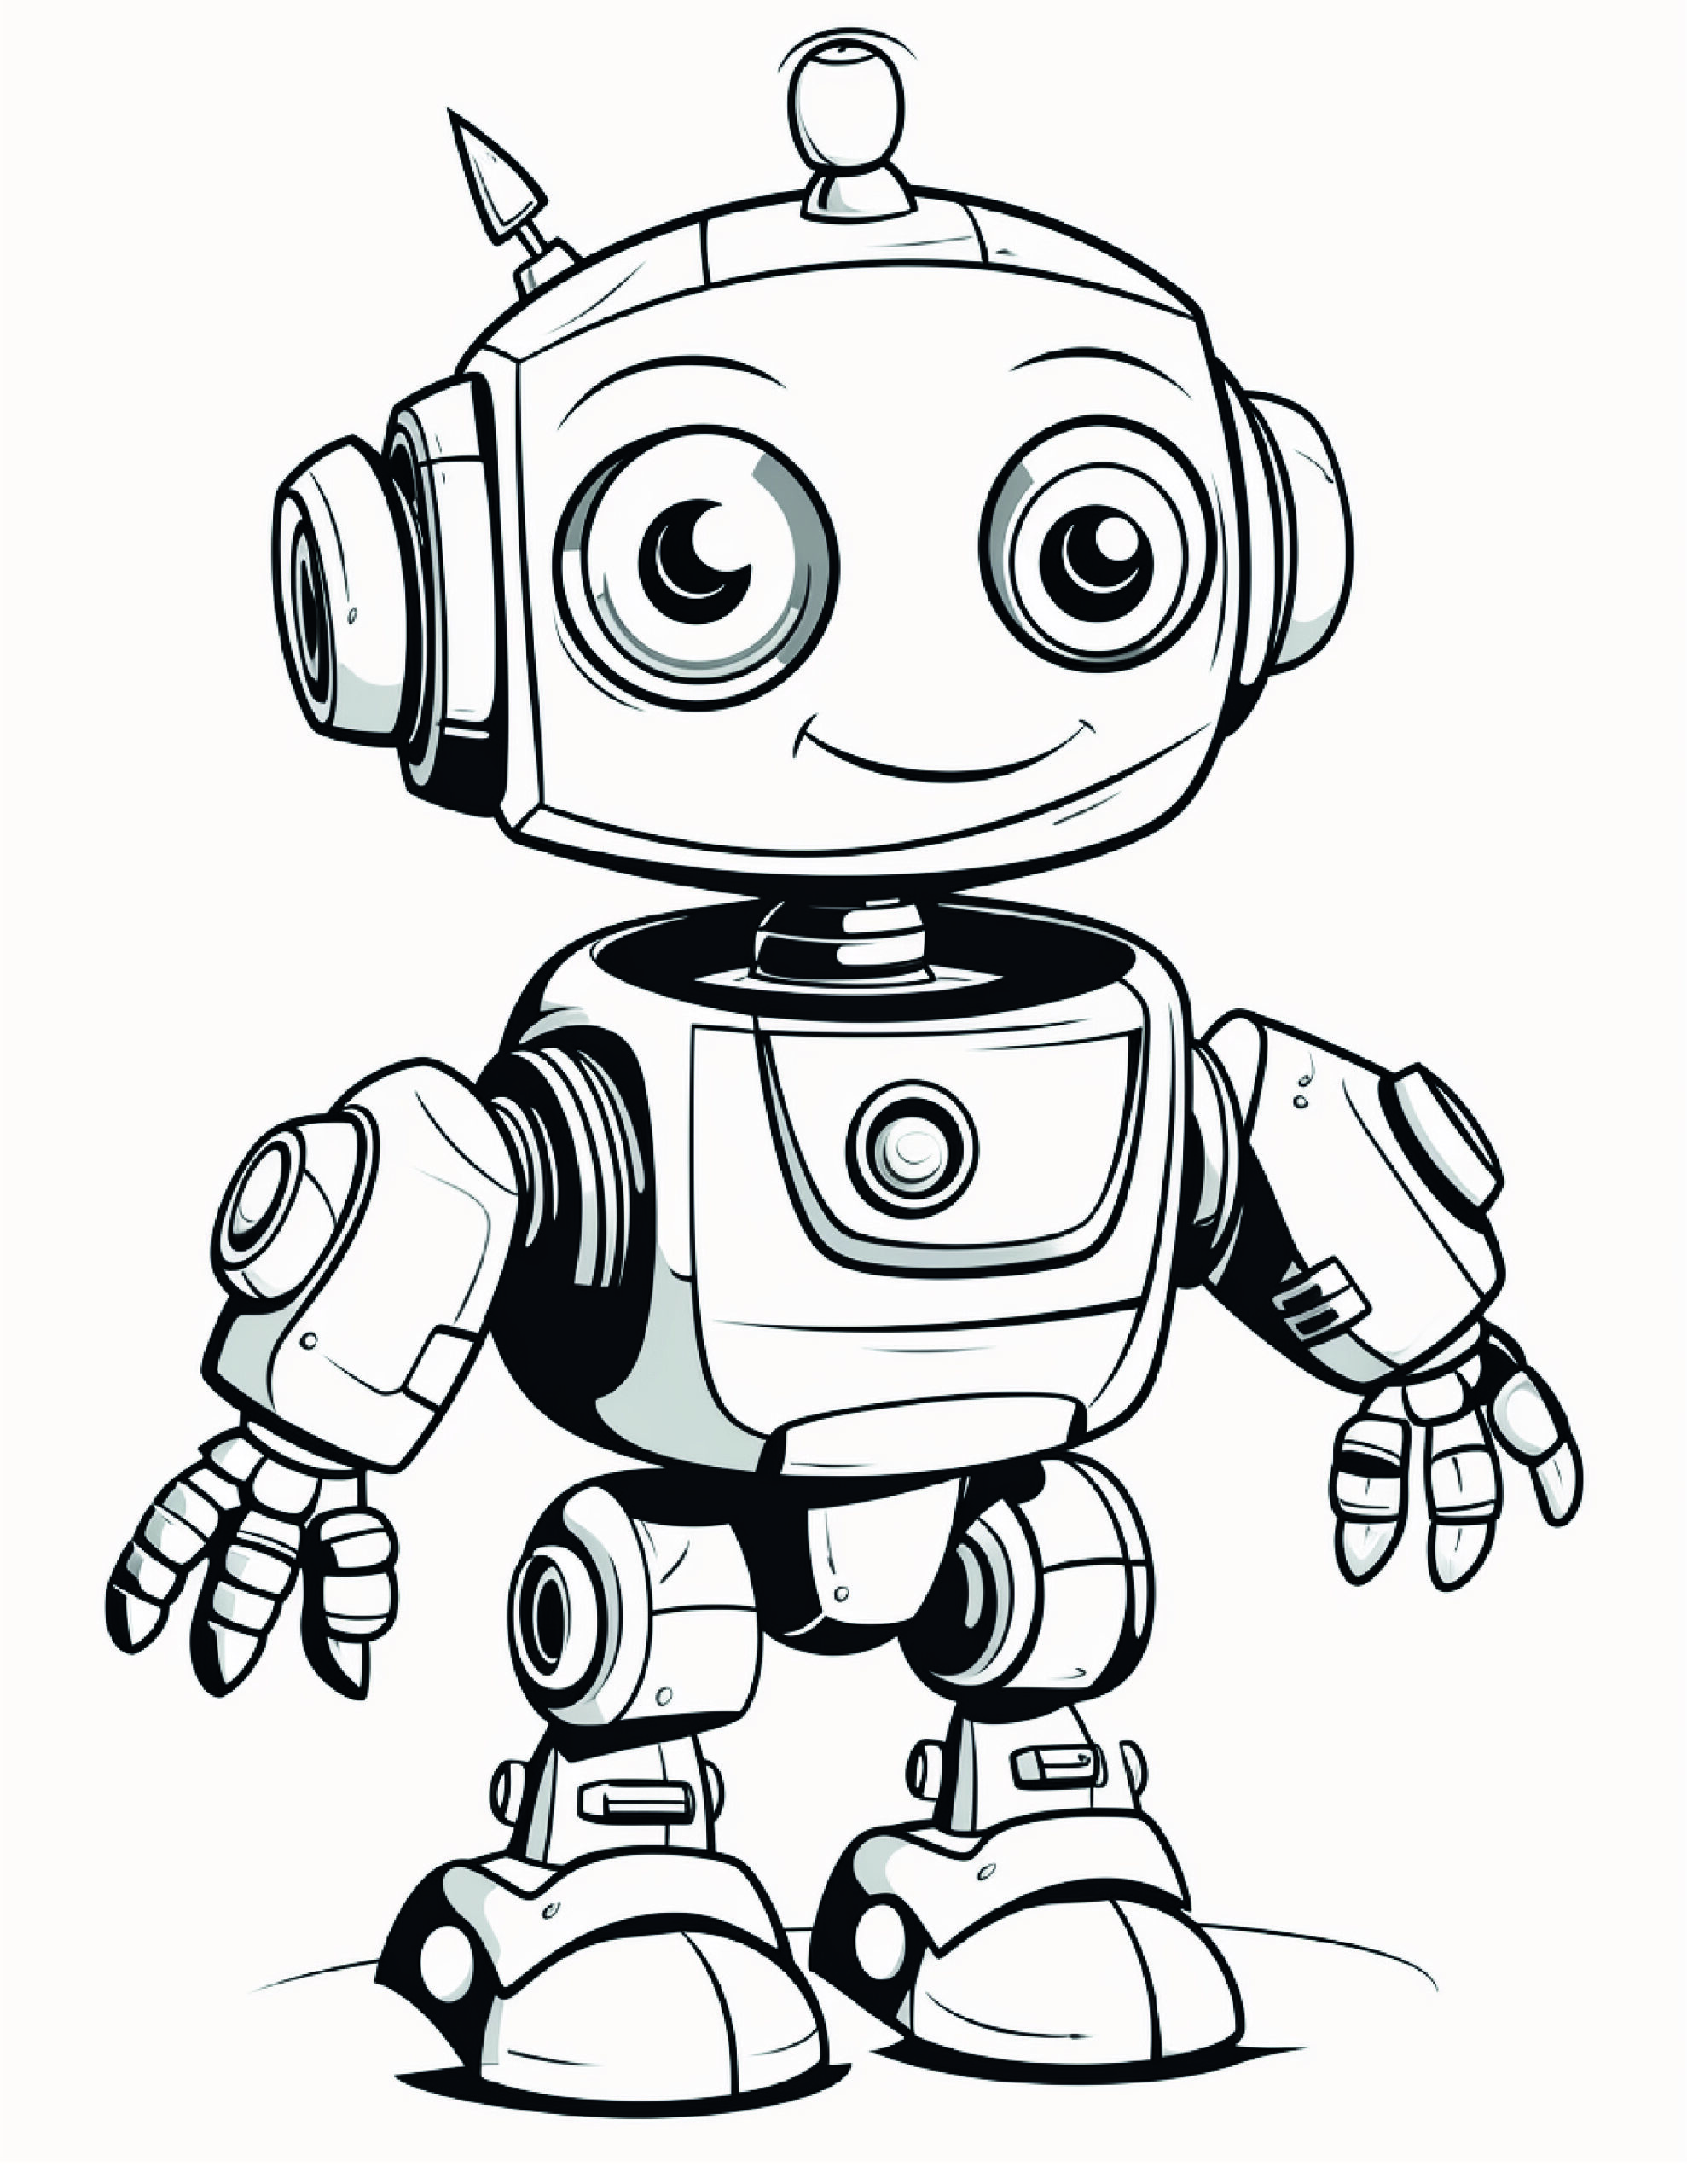 Skip to my Lou - Robot Coloring Pages - A line drawing of a smiling robot with big eyes.